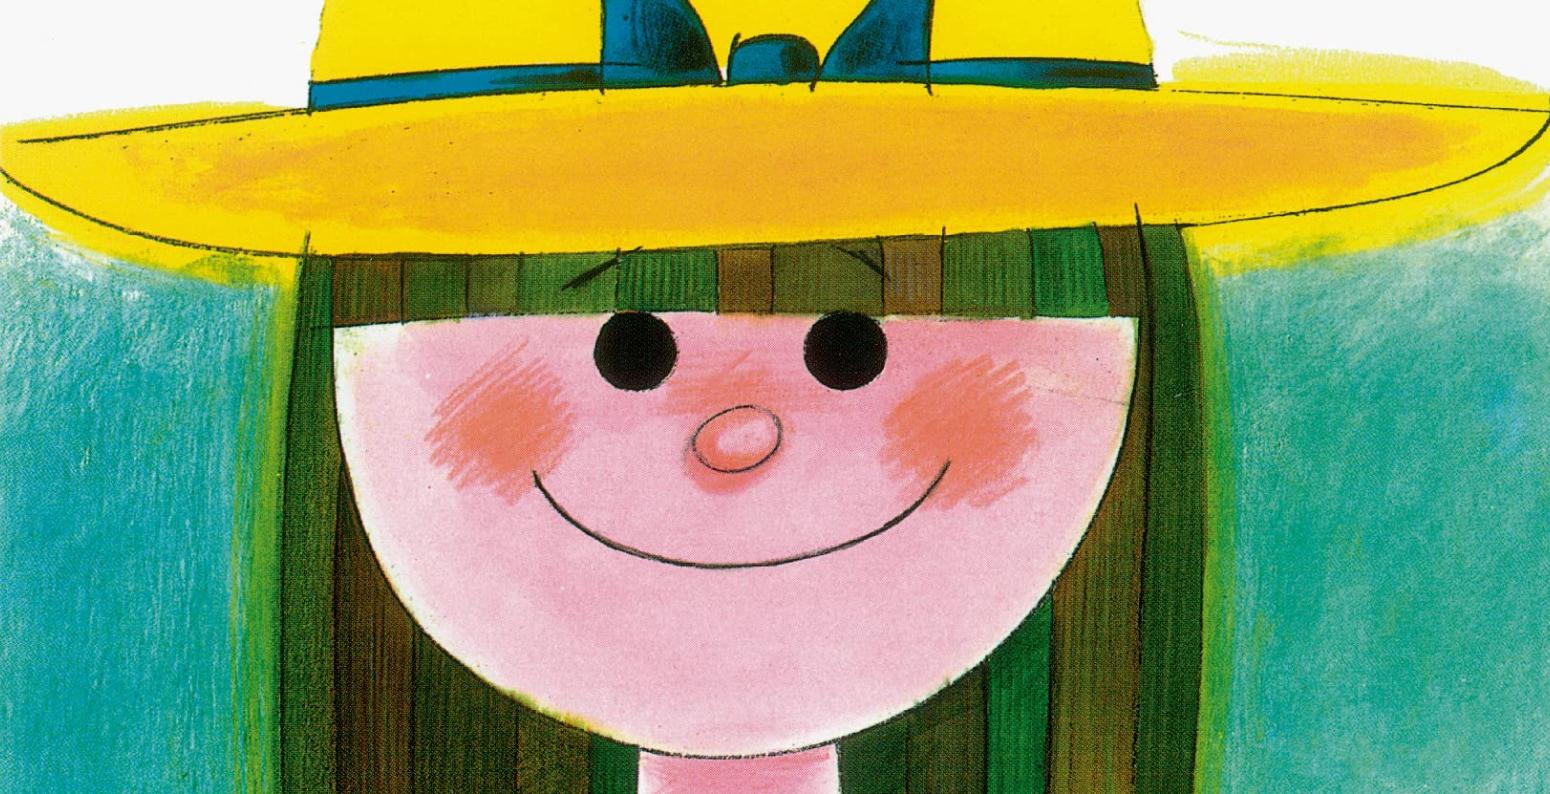 Smiling child with rosy cheeks and yellow hat.